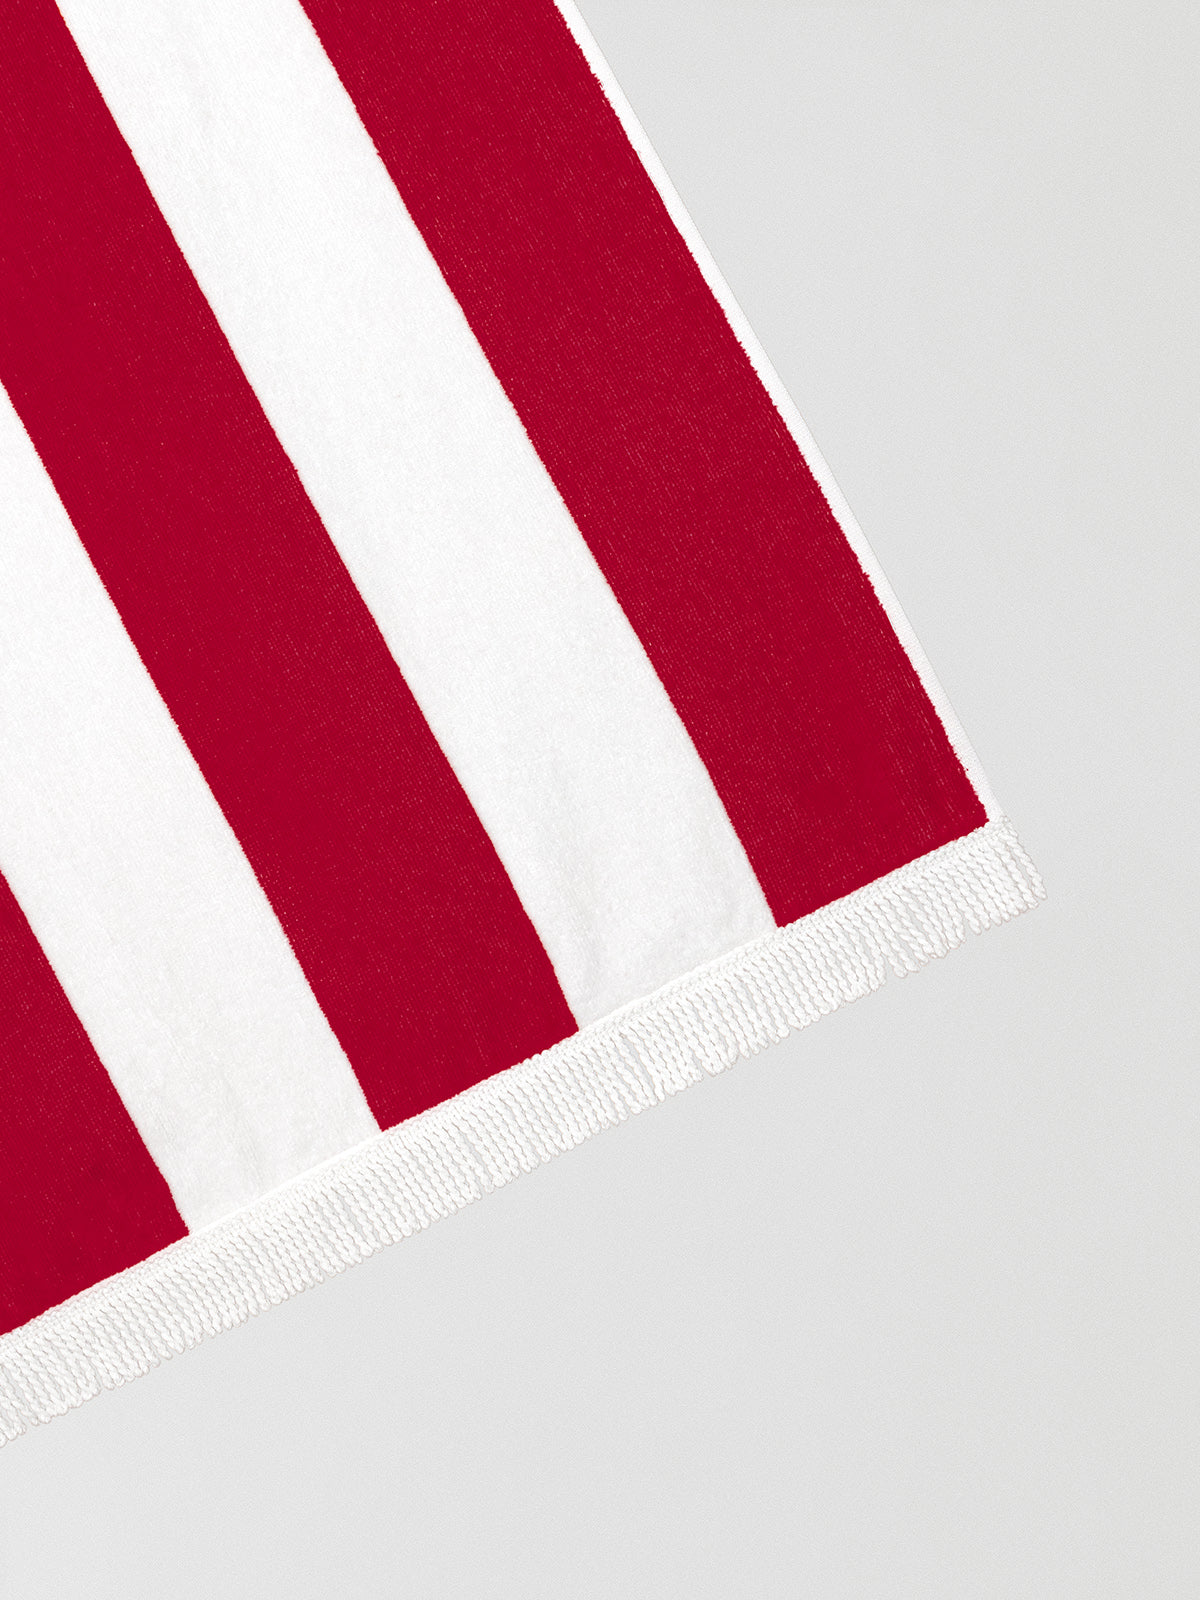 Red and white striped towel made of cotton